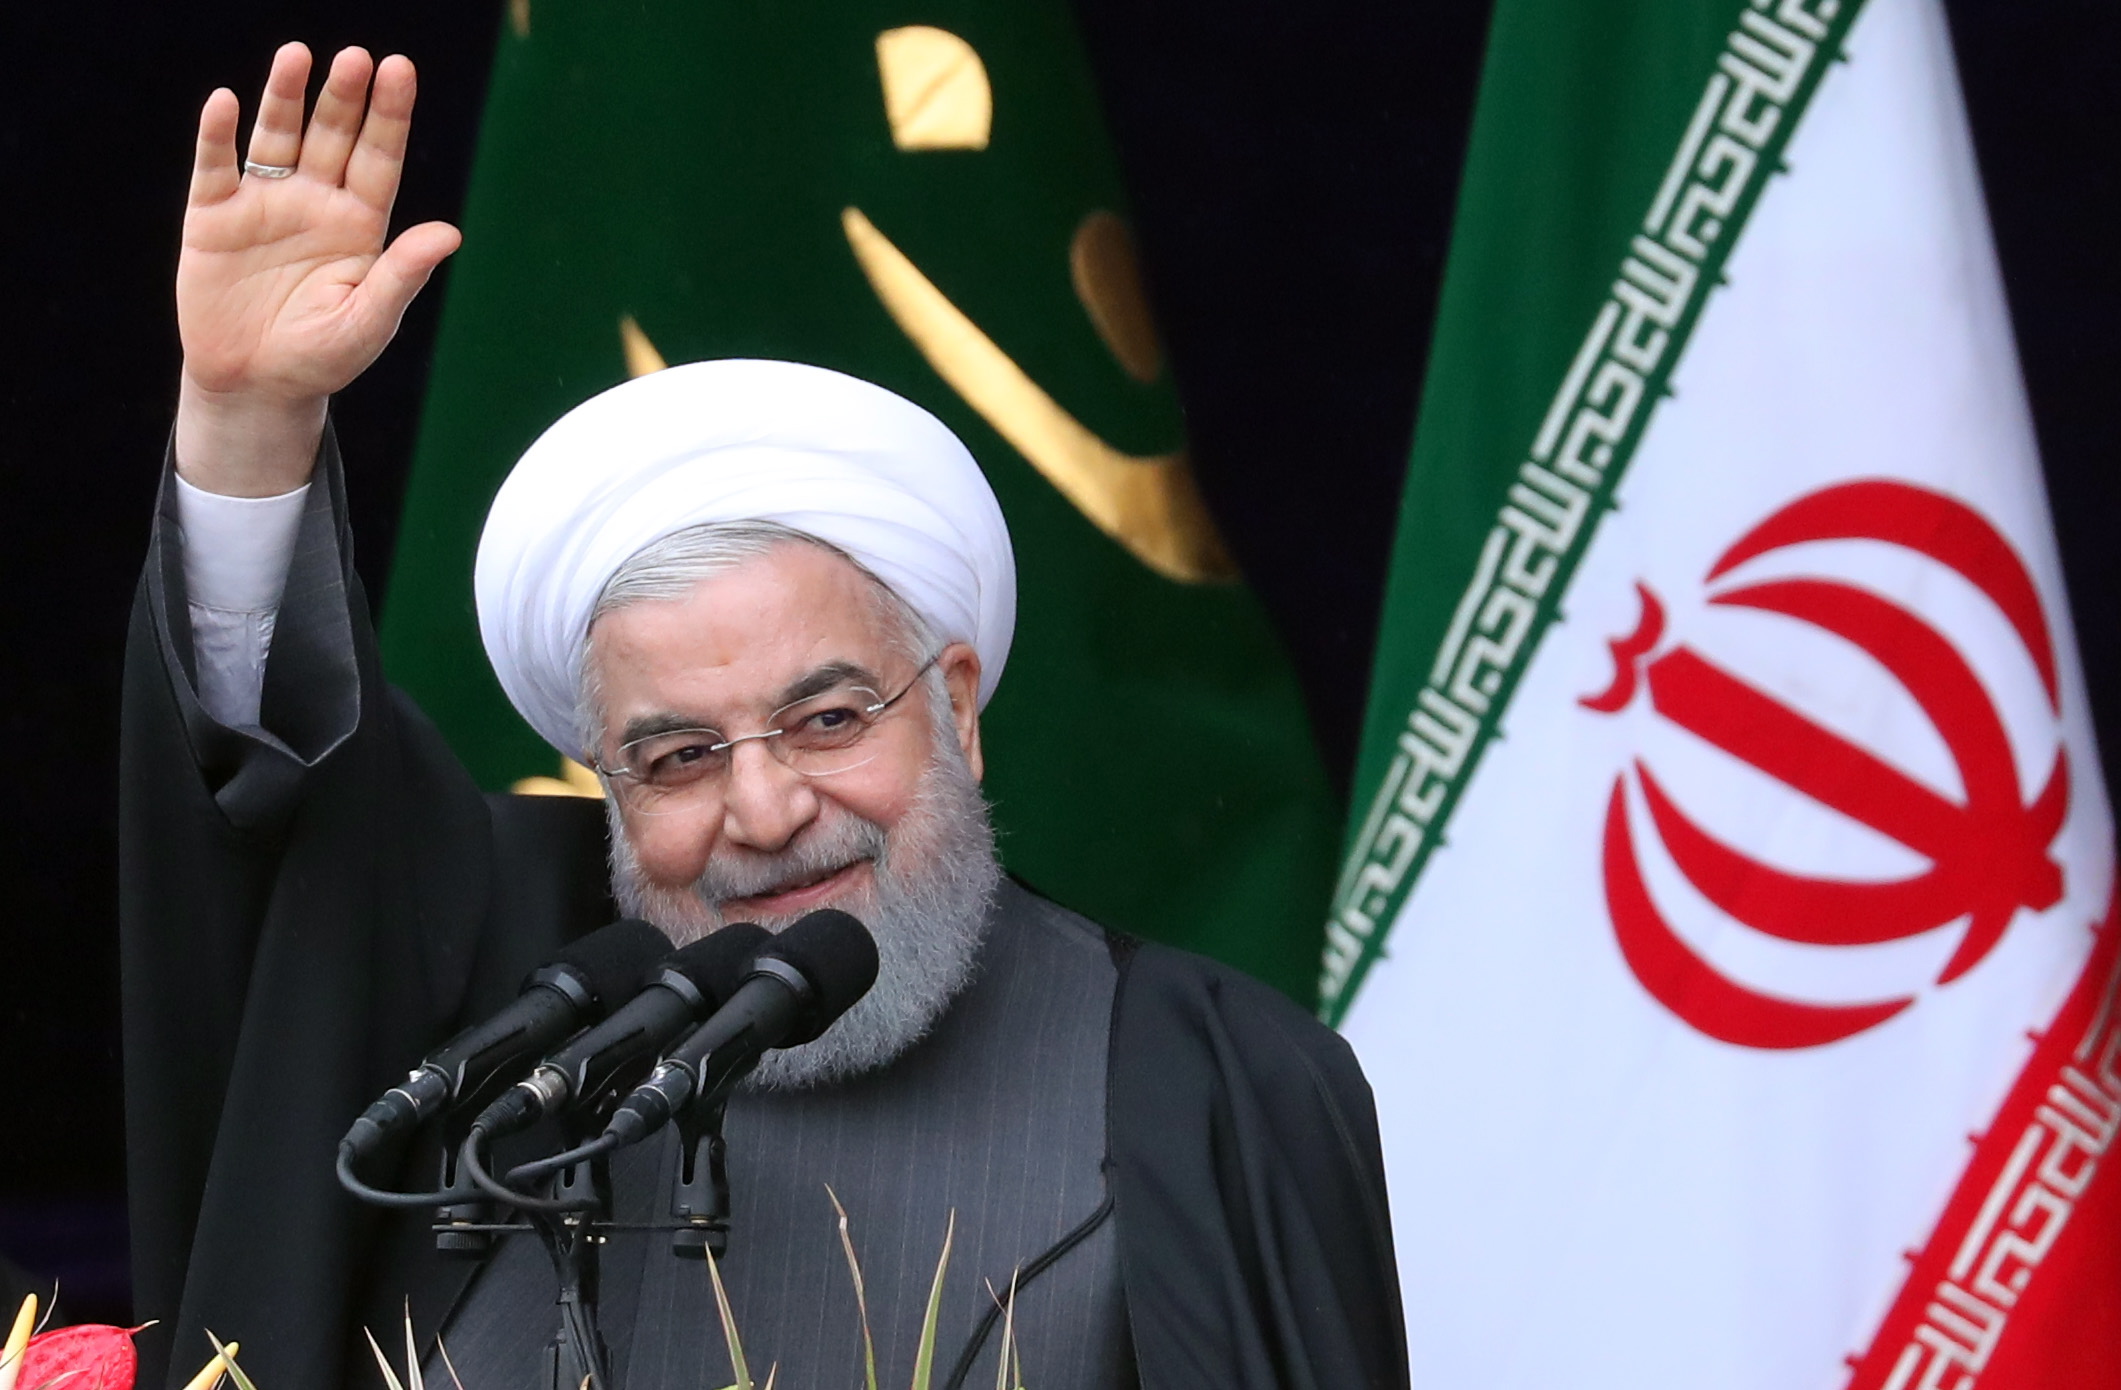 epa07361638 Iranian President Hassan Rouhani delivers his speech during a ceremony marking the 40th anniversary of the 1979 Islamic Revolution, at the Azadi (Freedom) square in Tehran, Iran, 11 February 2019. The event marks the 40th anniversary of the Islamic revolution, which came ten days after Ayatollah Ruhollah Khomeini's return from his exile in Paris to Iran, toppling the monarchy system and forming the Islamic Republic.  EPA/ABEDIN TAHERKENAREH